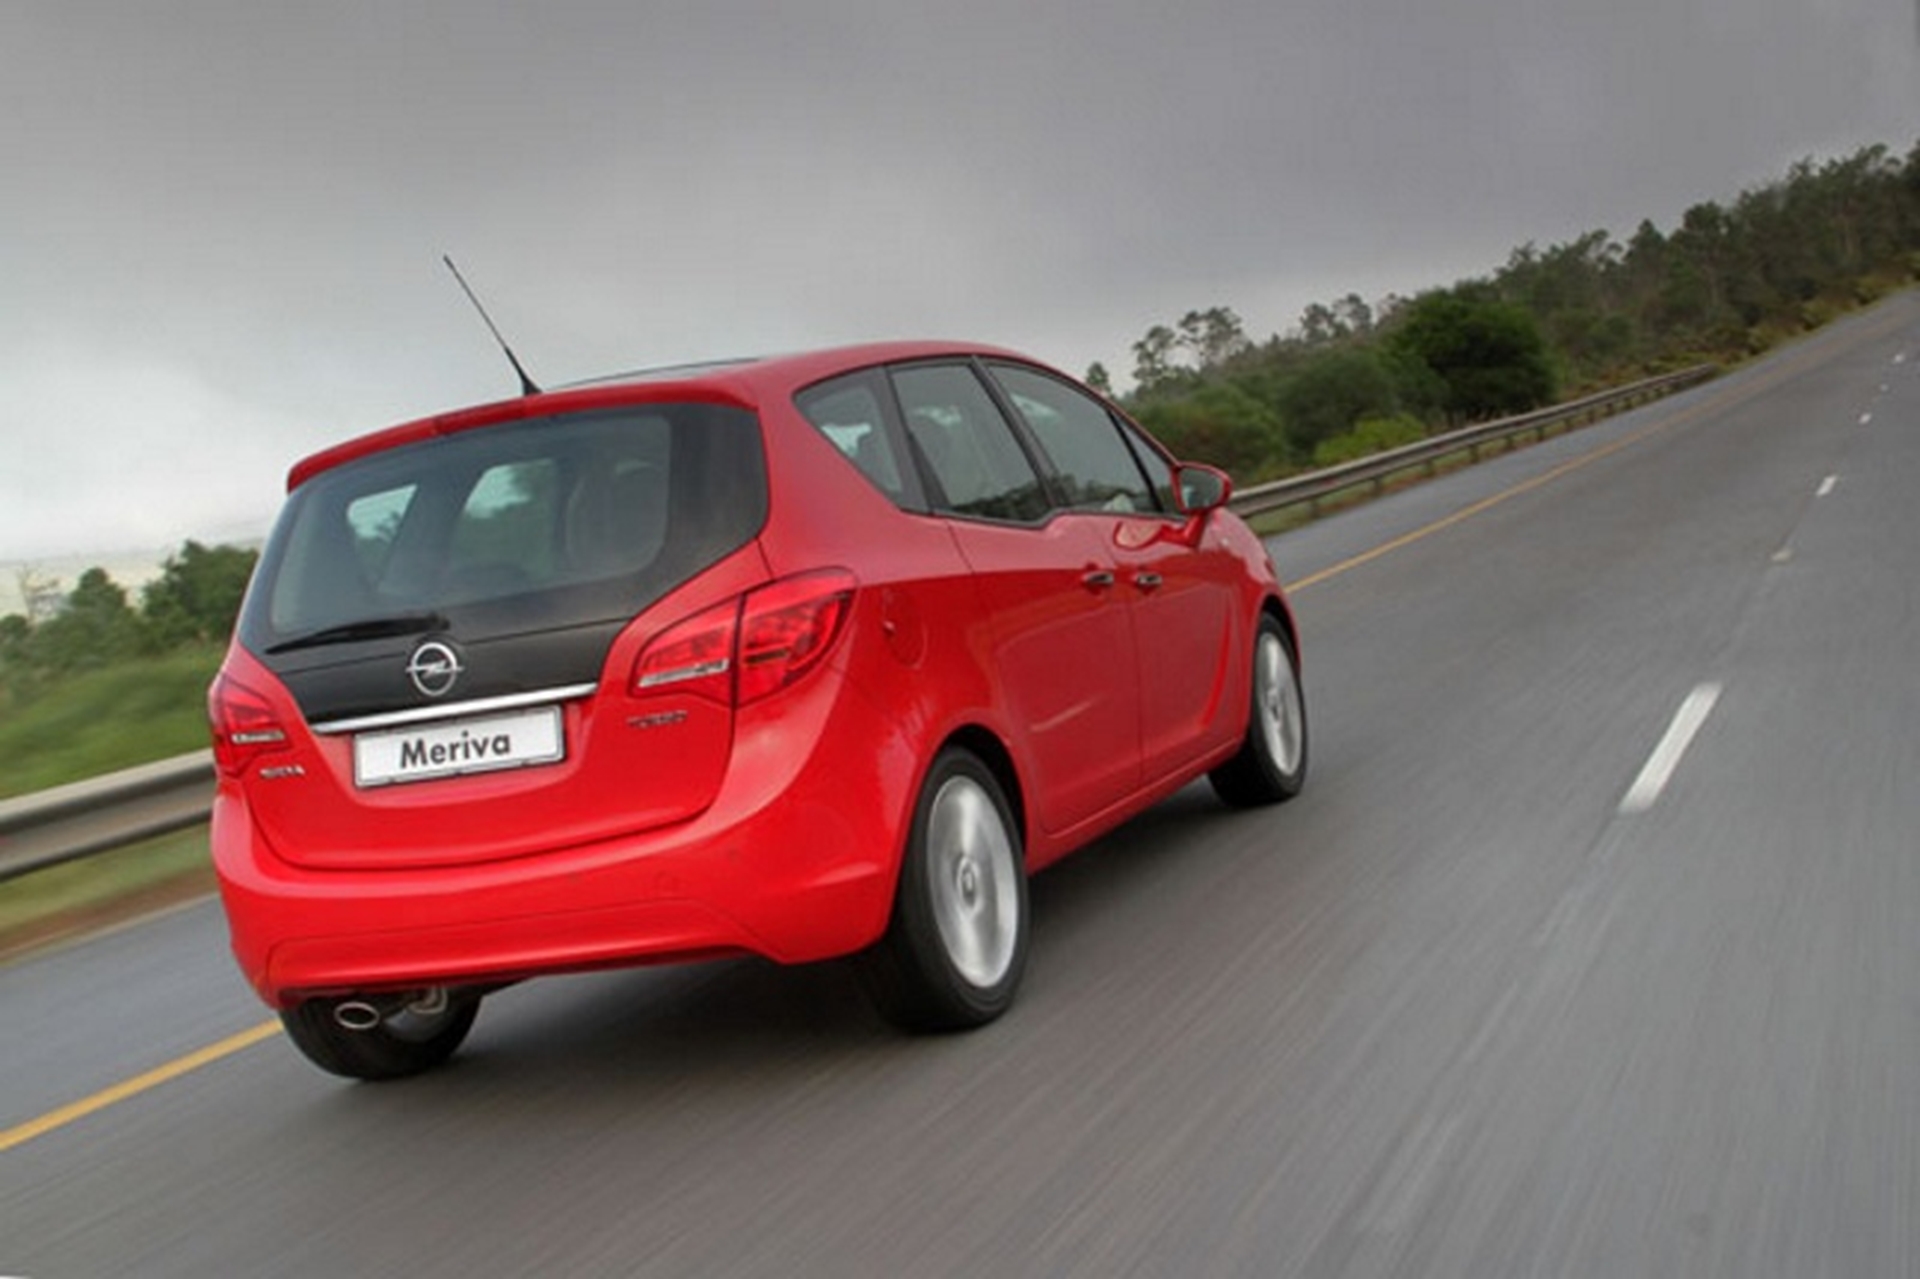 Opel Meriva South Africa Offers Style Innovation And Flexibility